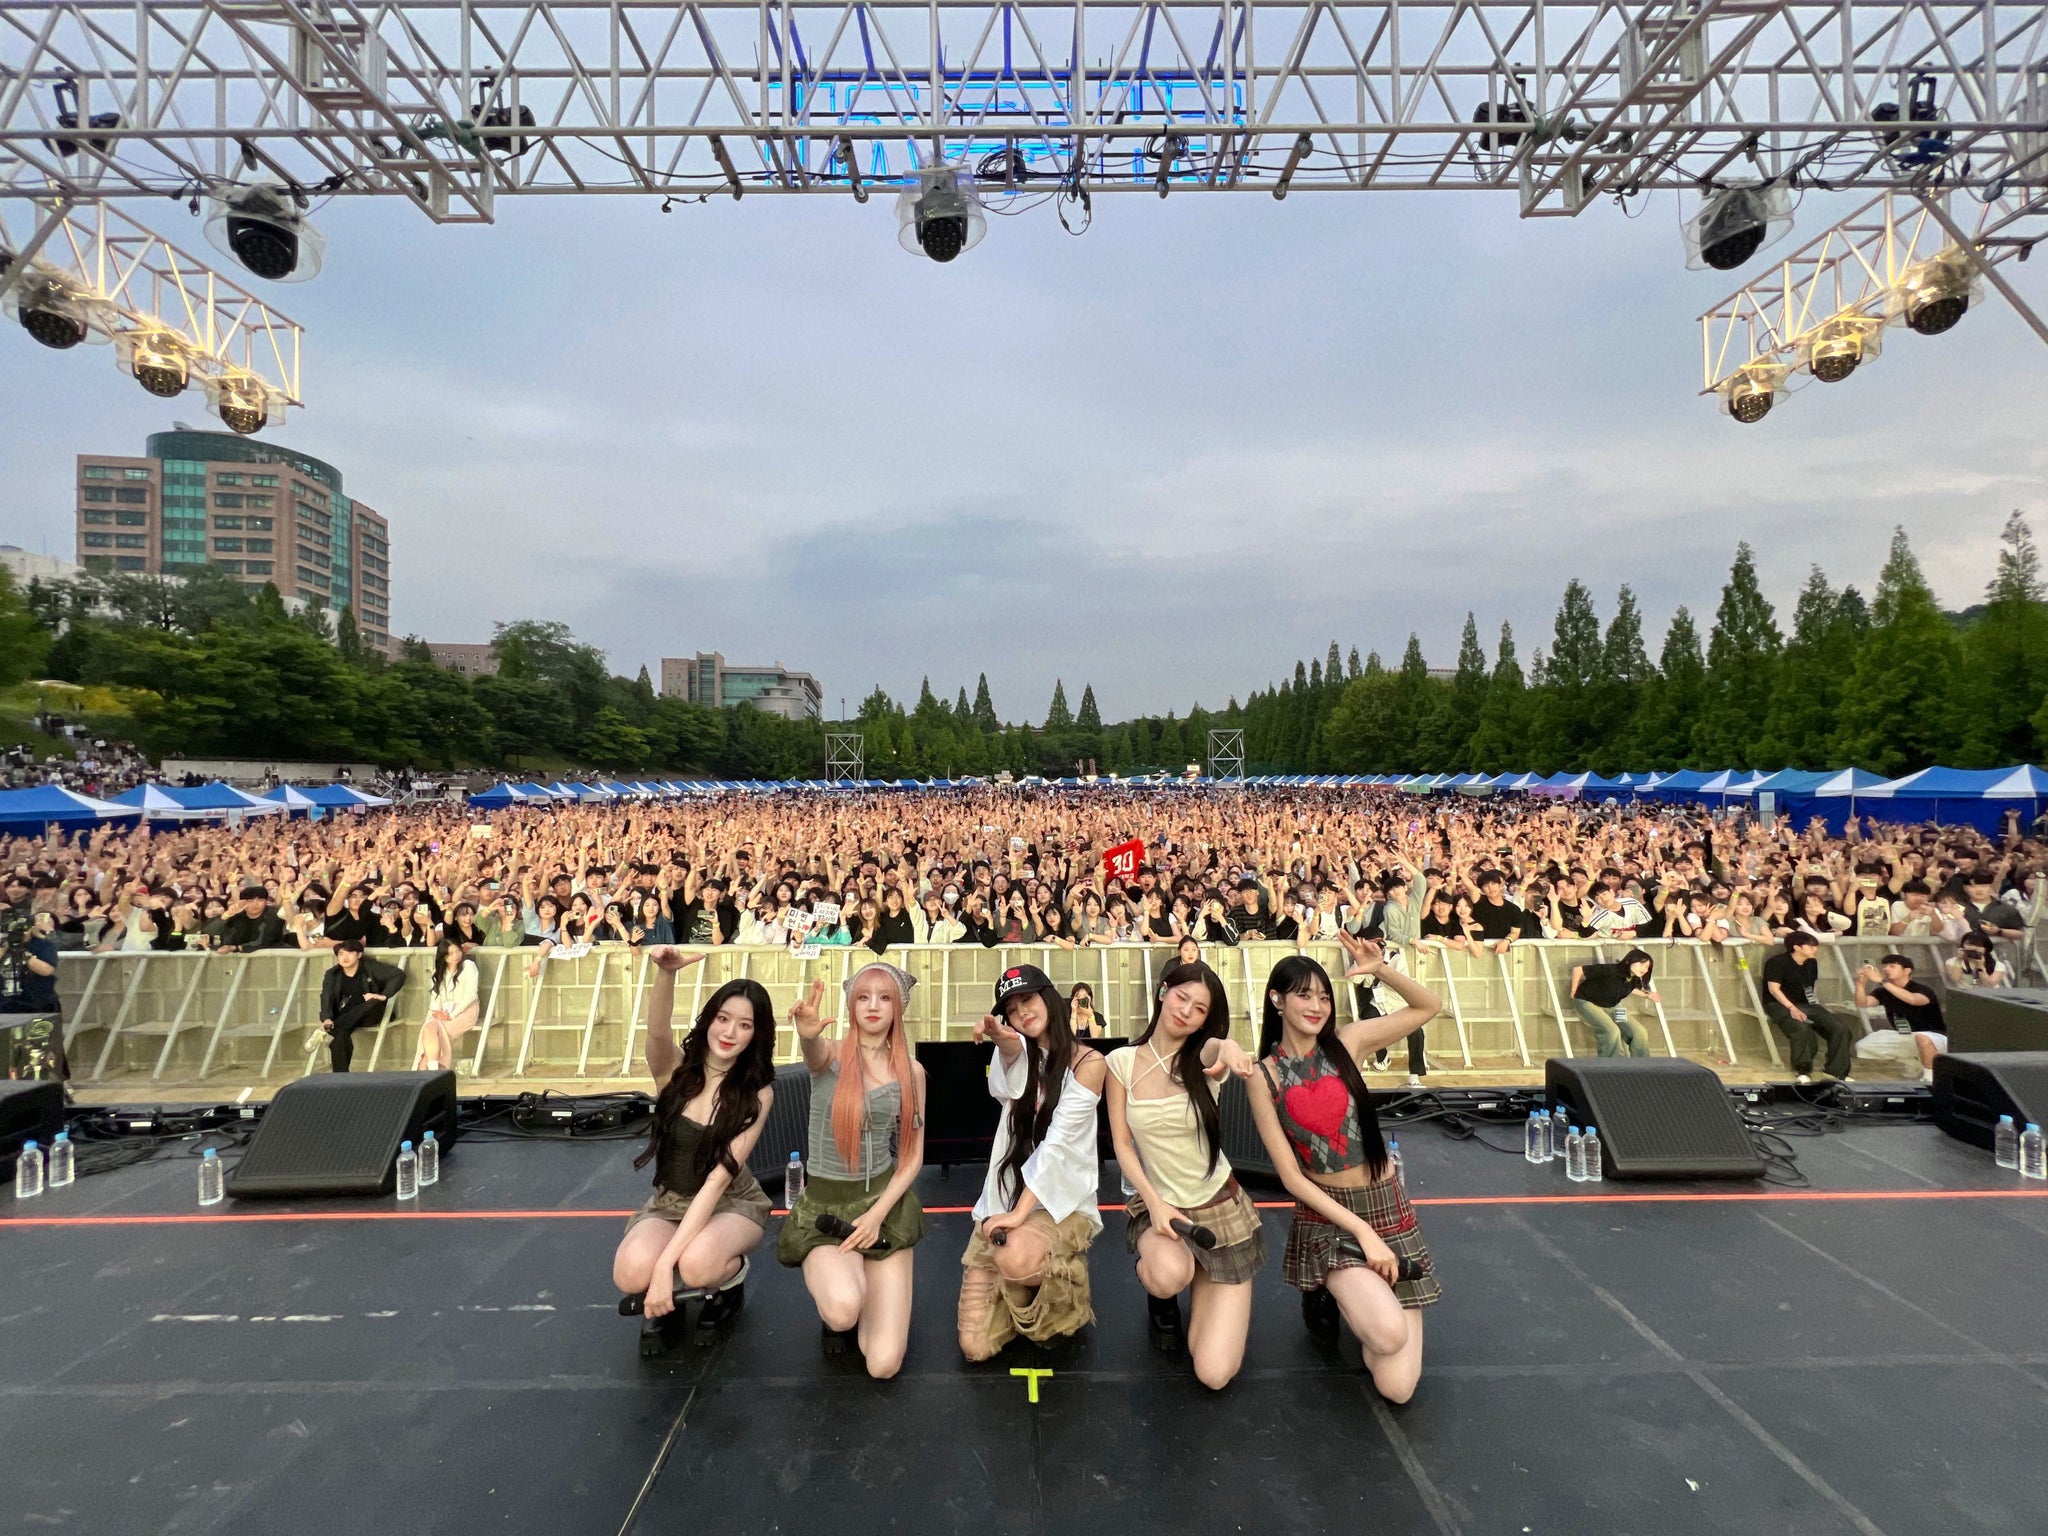 [Kpop Planet News] (G)I-DLE Drop Dates For Third World Tour "iDOL"